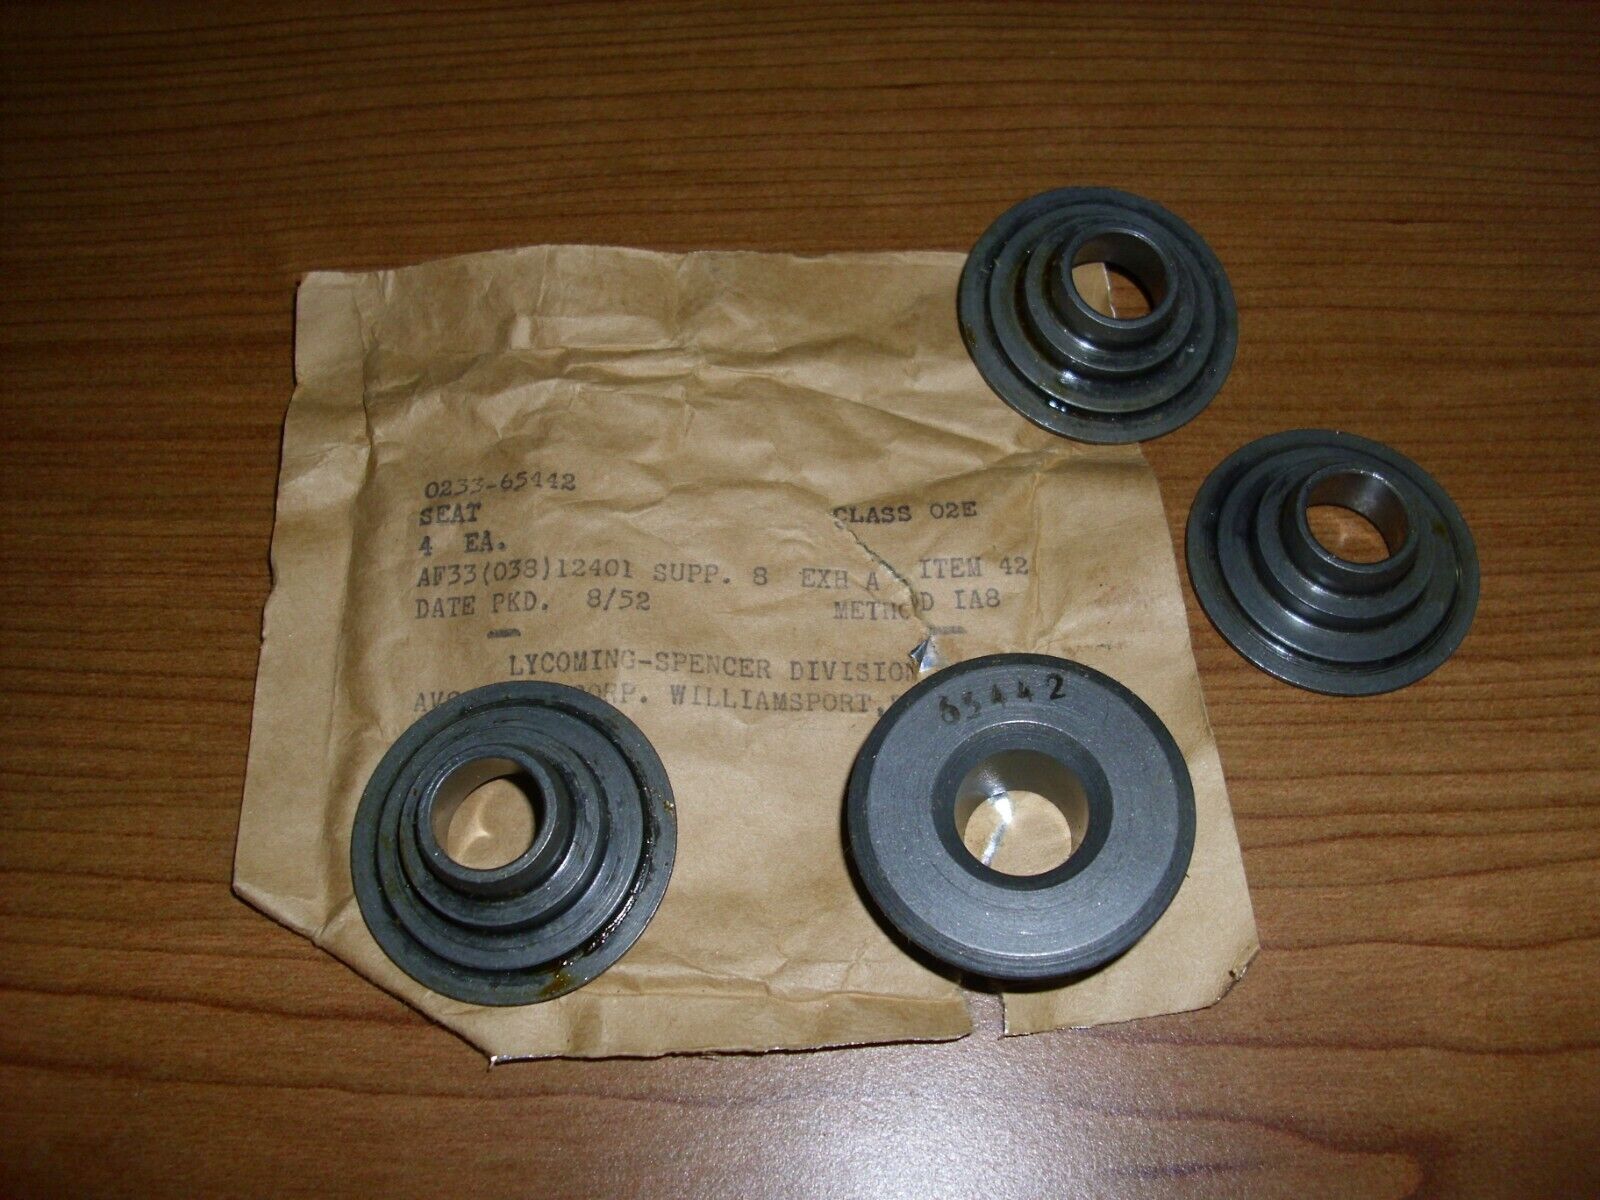 1952 Lycoming-Spencer Valve Seats 0233-65442 *Pack of 4*